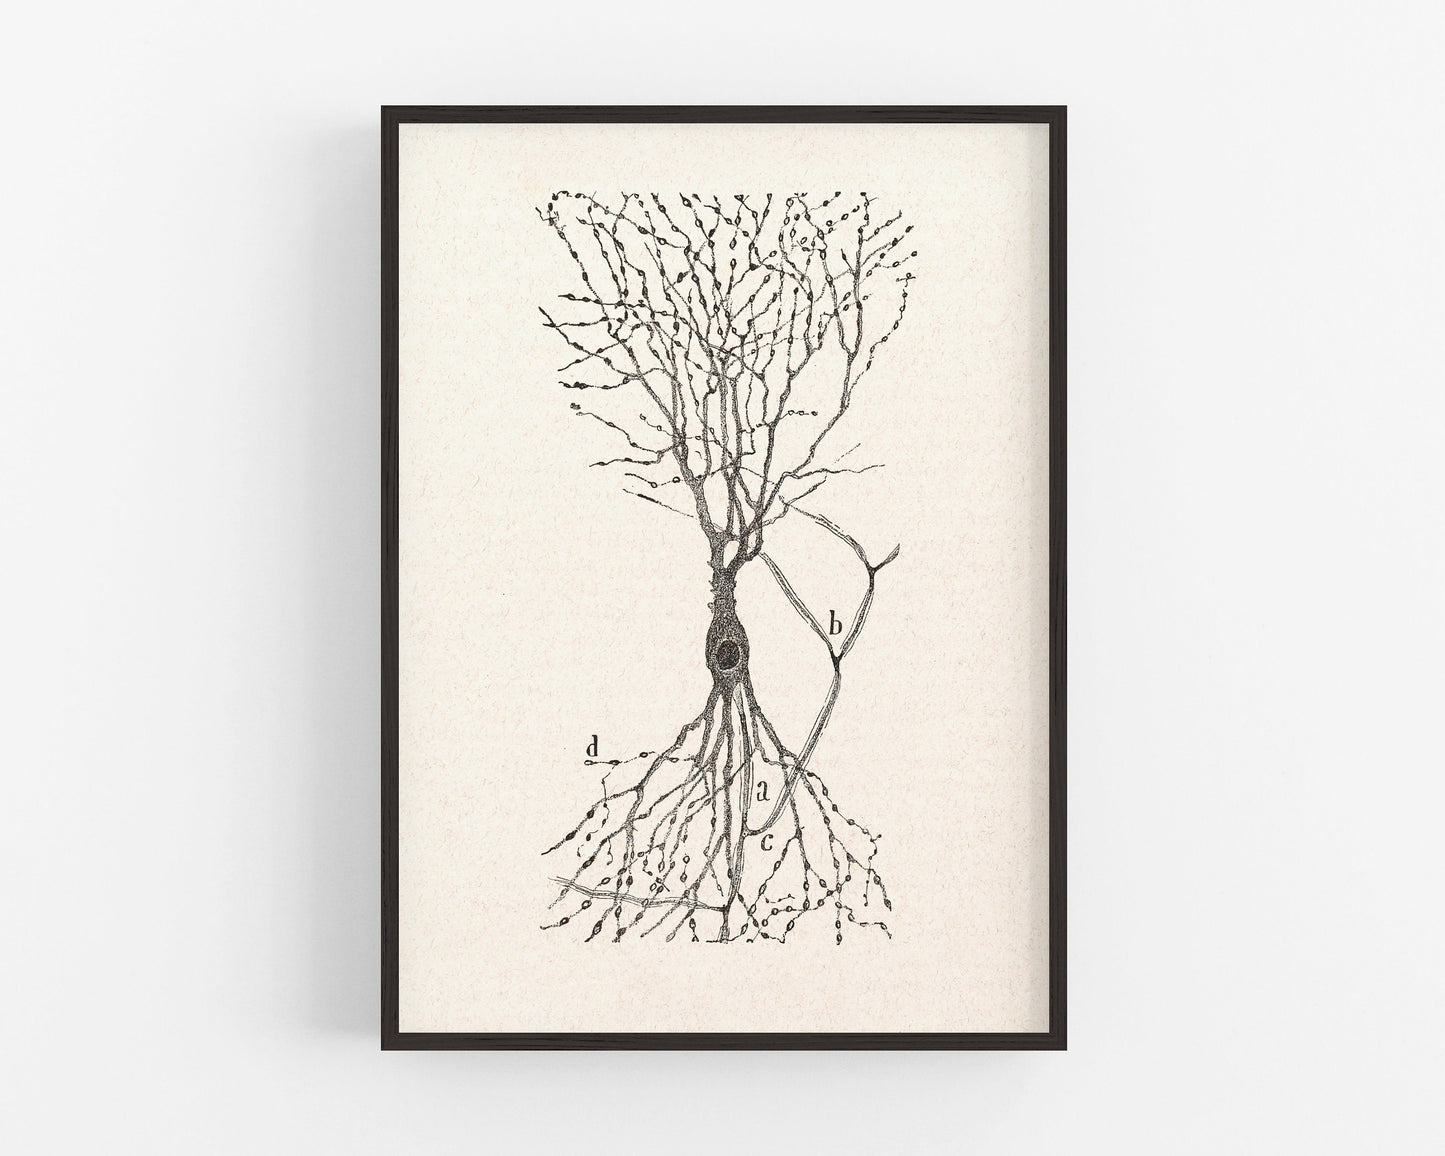 Vintage cell drawing | Santiago Ramón y Cajal | Cell of a rabbit | Antique anatomical wall art | Neuroscience & Biology art | Spanish artist